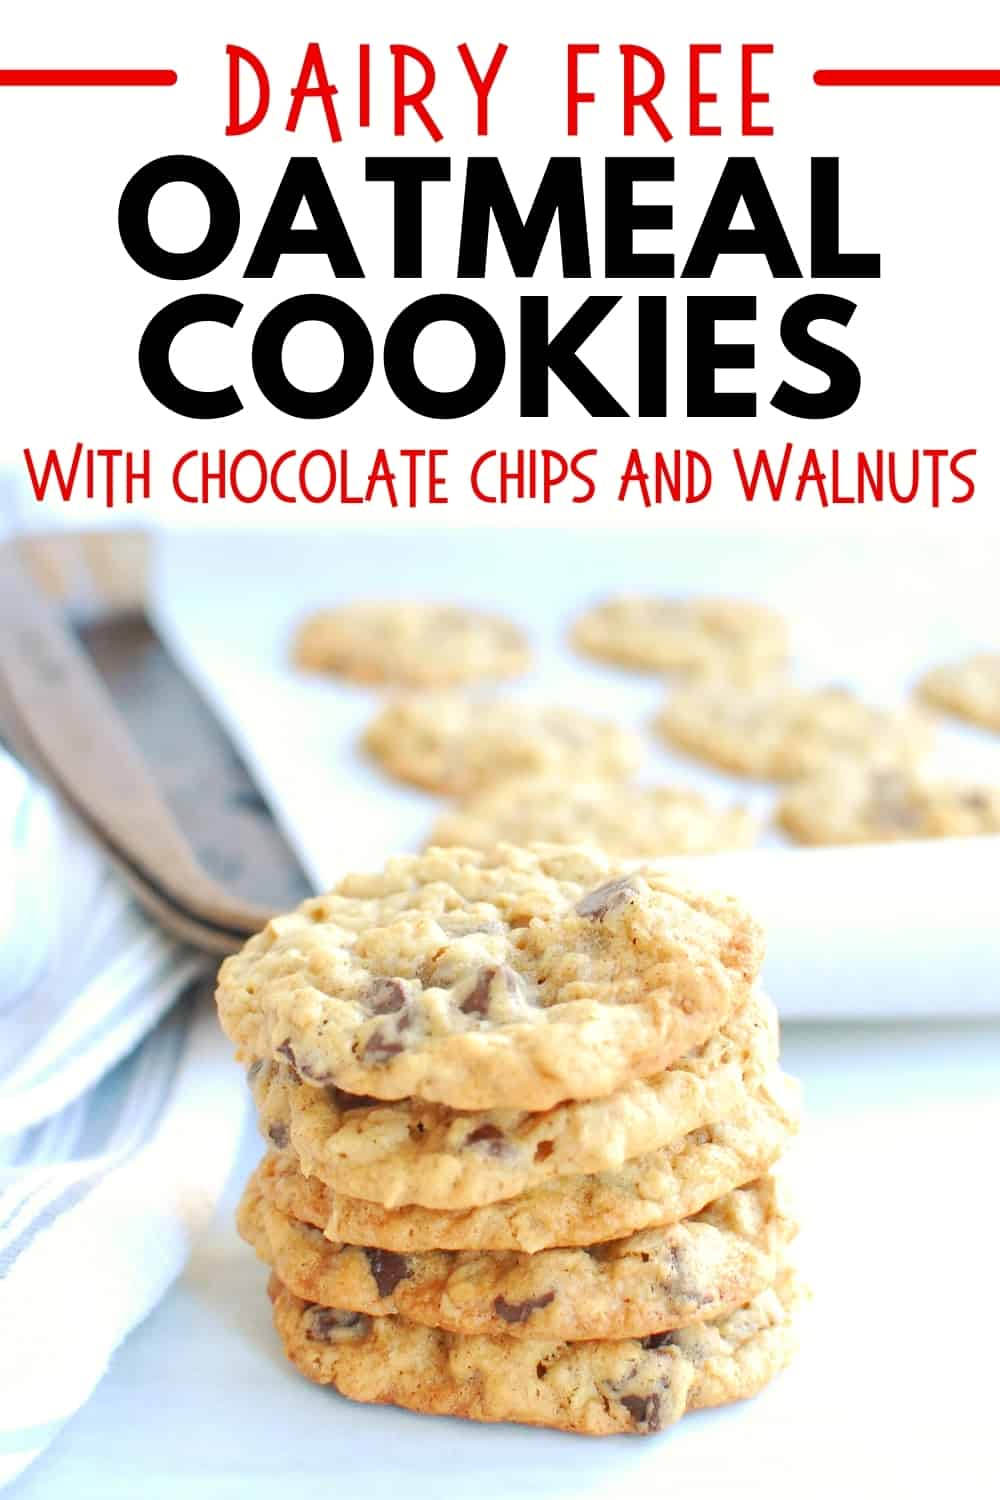 Several cookies stacked on top of each other with a text overlay that says dairy free oatmeal cookies with chocolate chips and walnuts.